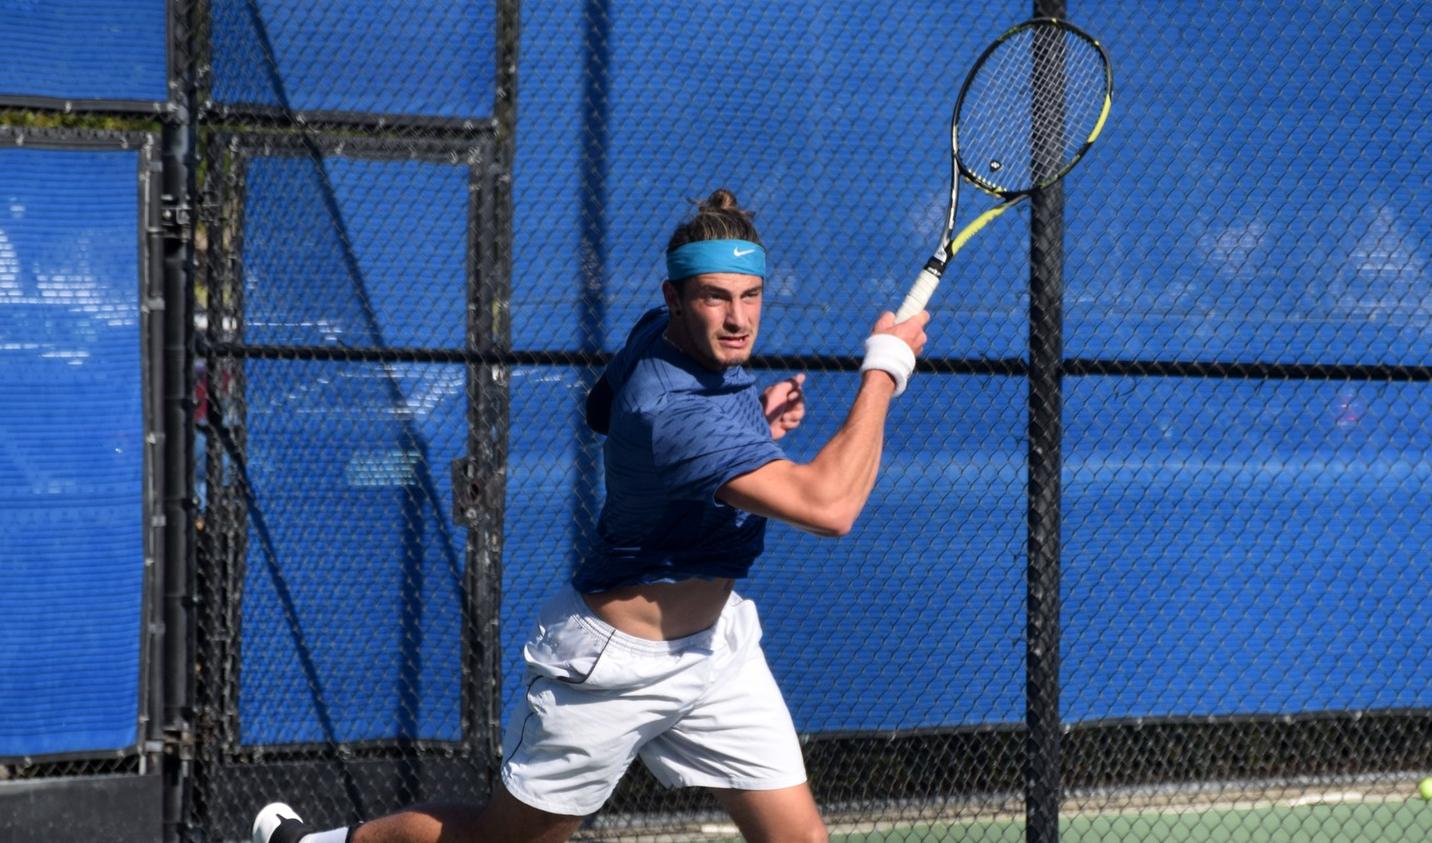 Men's tennis team topples Division III Wisconsin-Whitewater